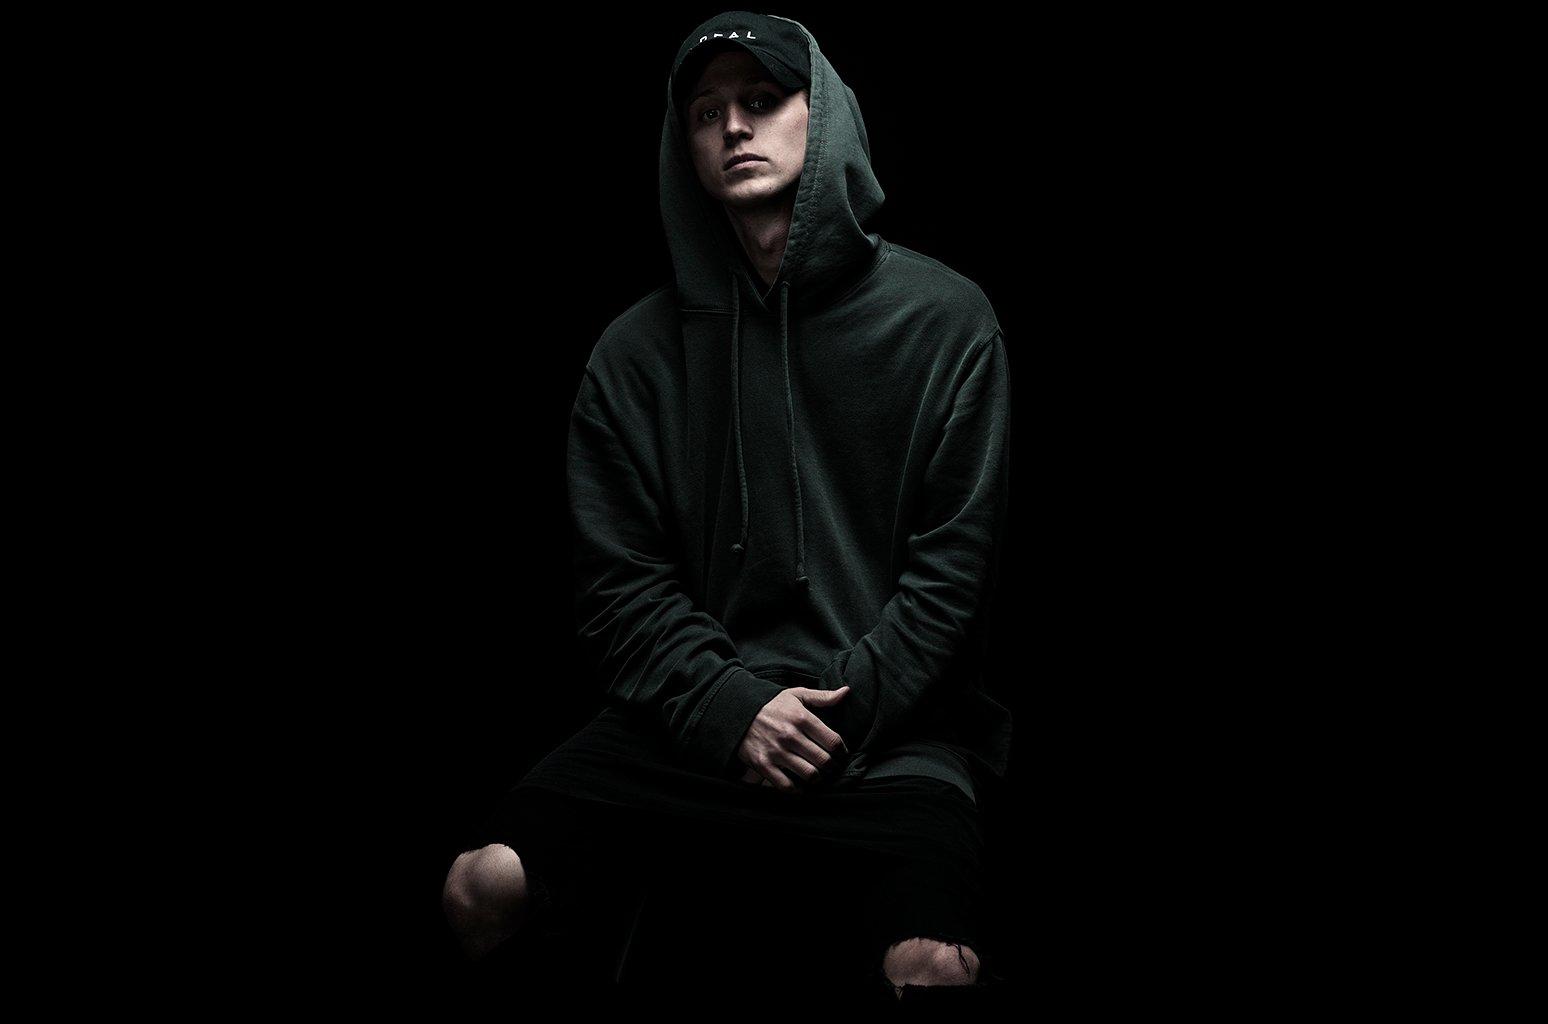 NF music, videos, stats, and photo